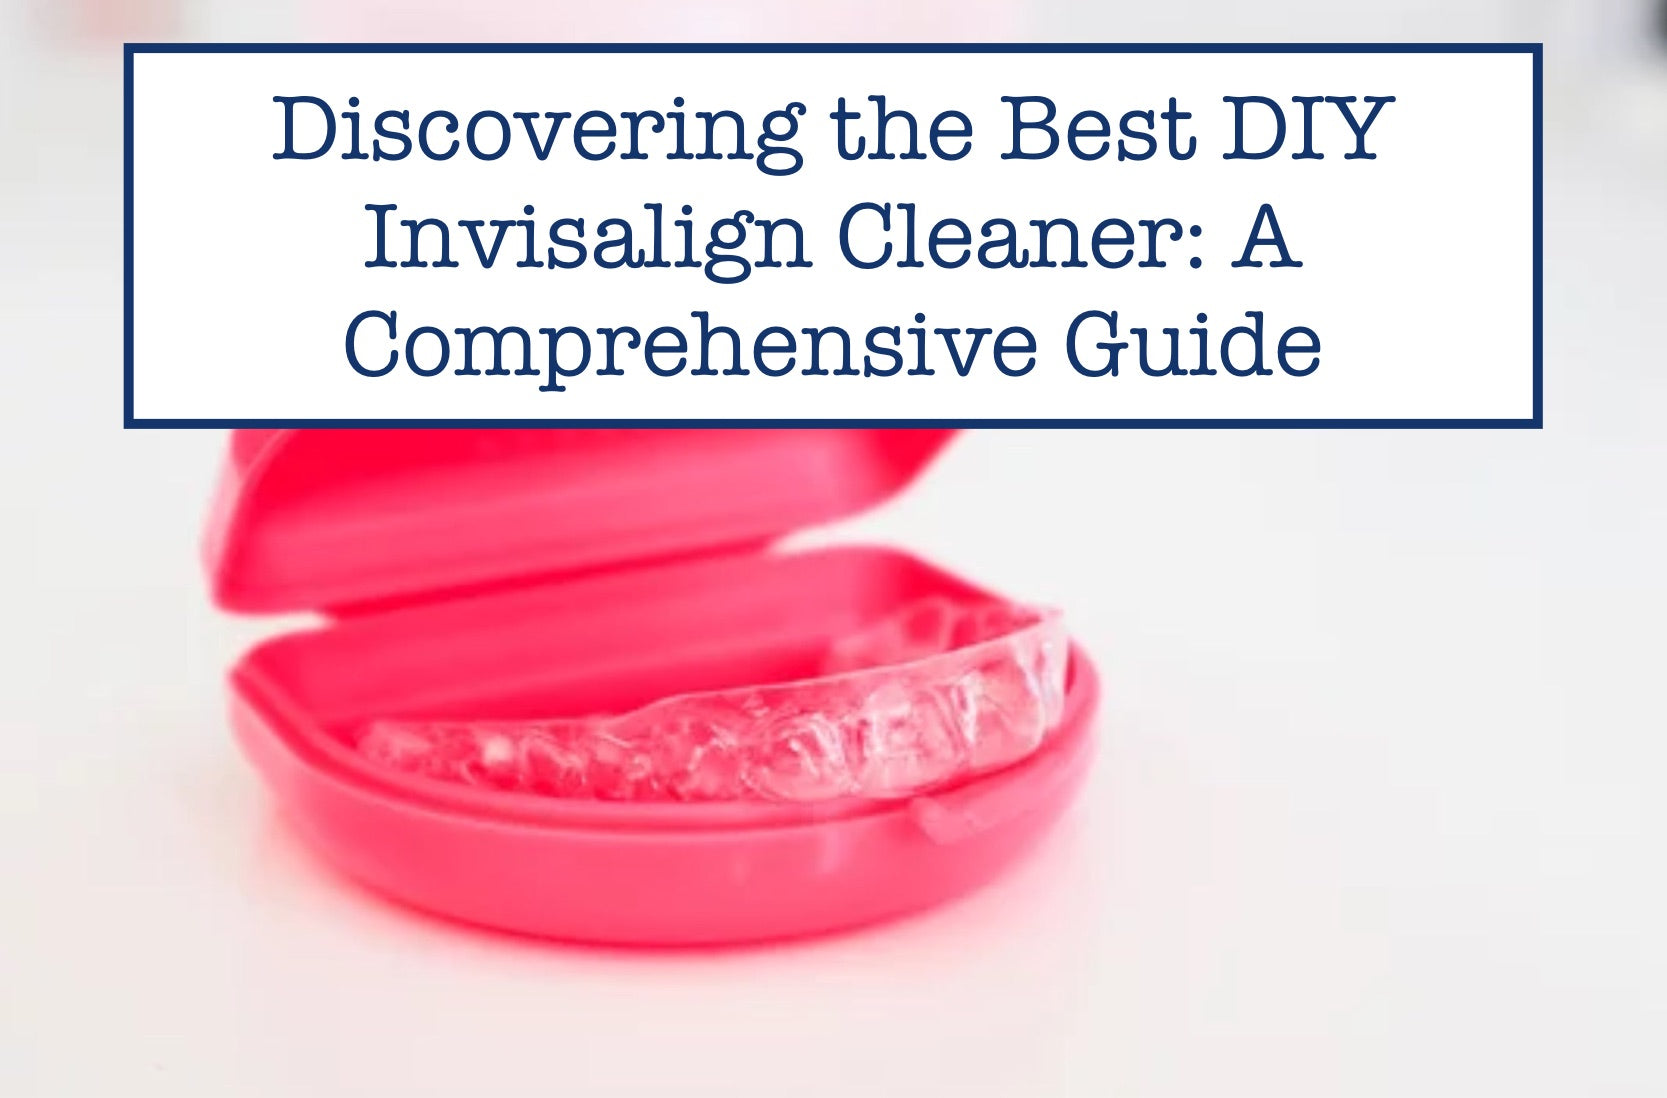 Discovering the Best DIY Invisalign Cleaner: A Comprehensive Guide